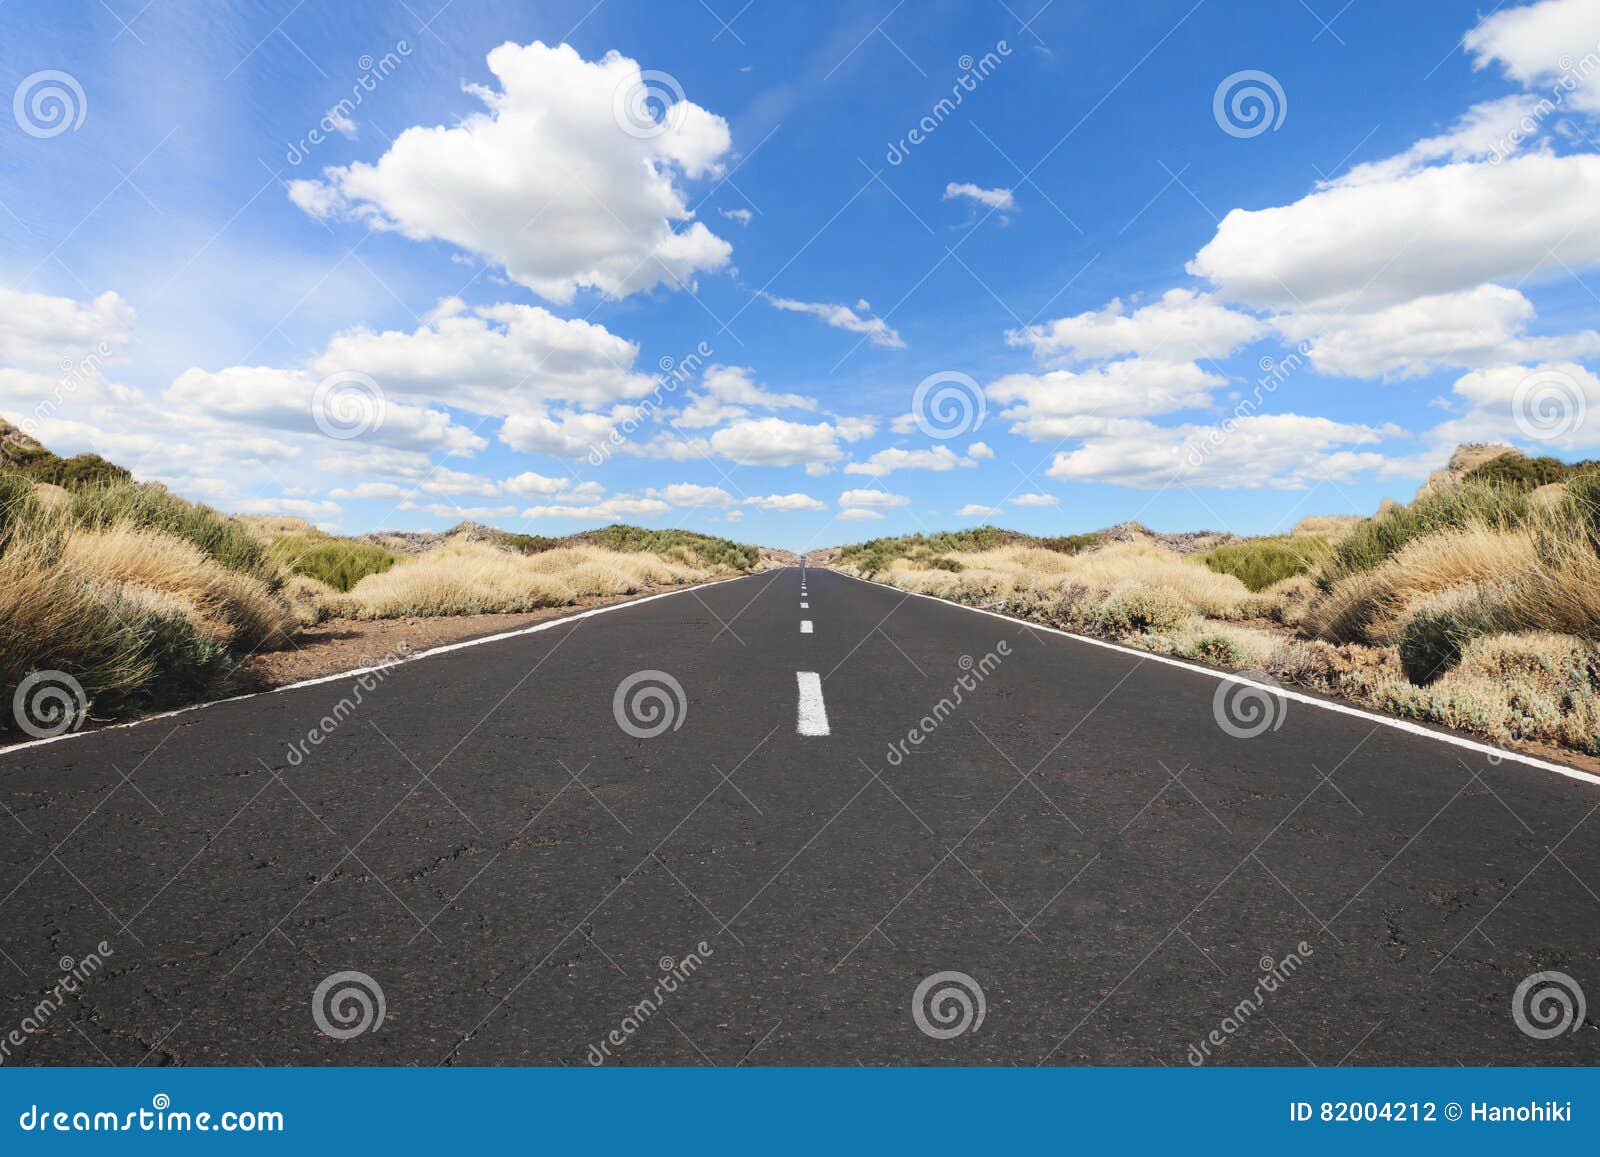 Empty Highway In Landscape Straight Road Stock Photo Image Of